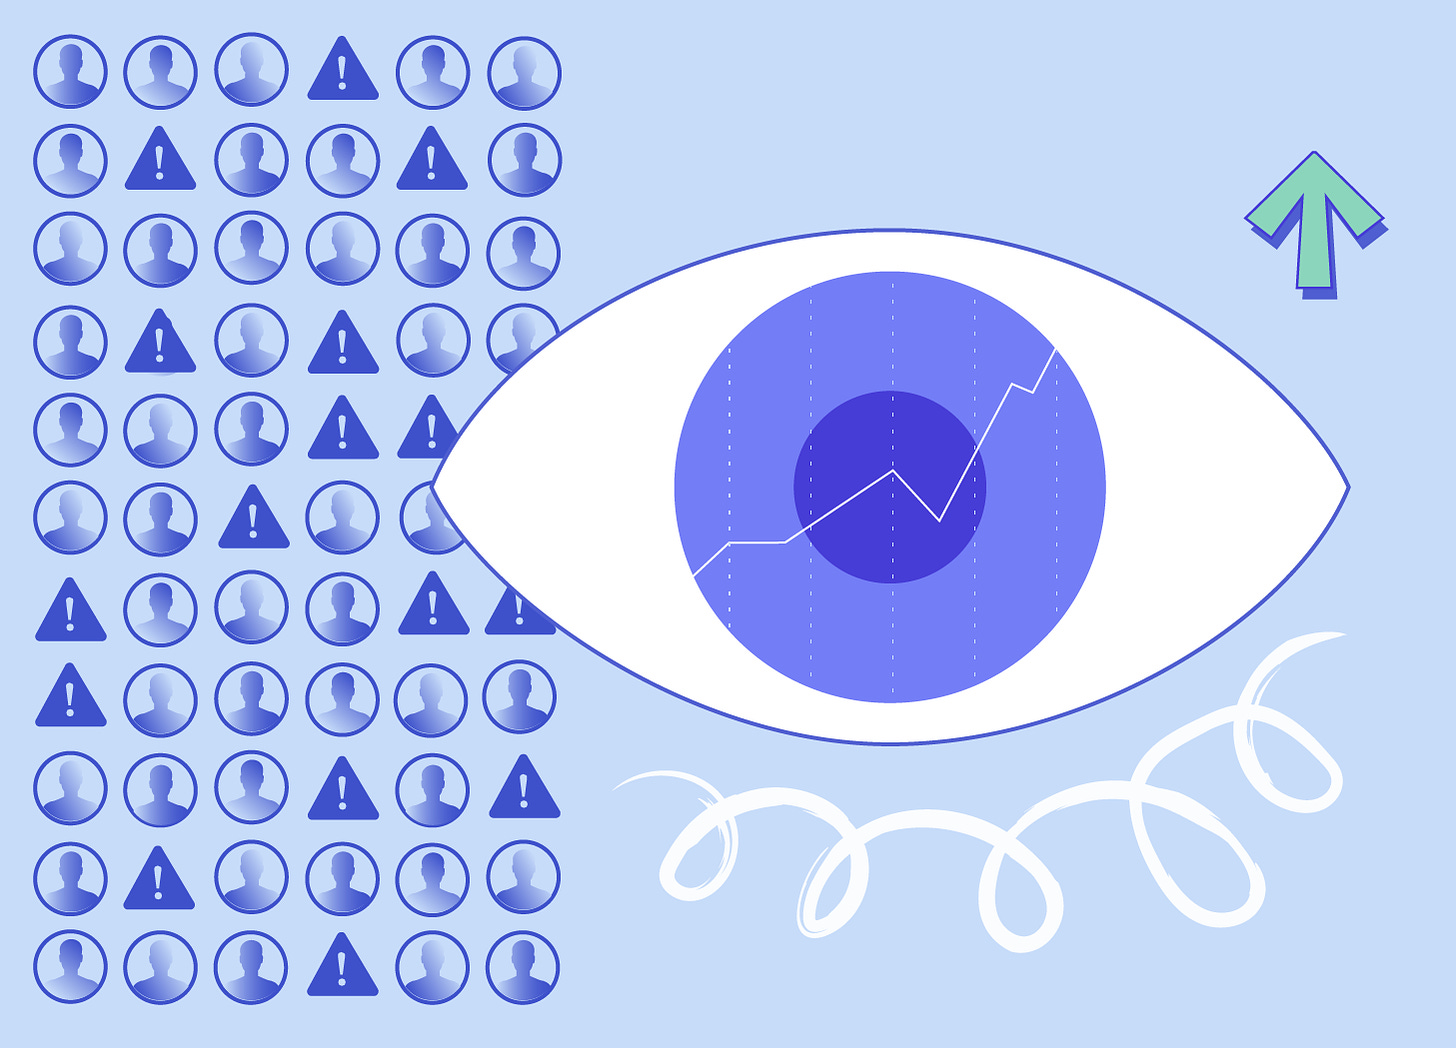 An illustration with many small silhouette avatar images and warning symbols, a large eye with a growth chart in the iris, a squiggly line flourish, and an upward-pointing arrow.